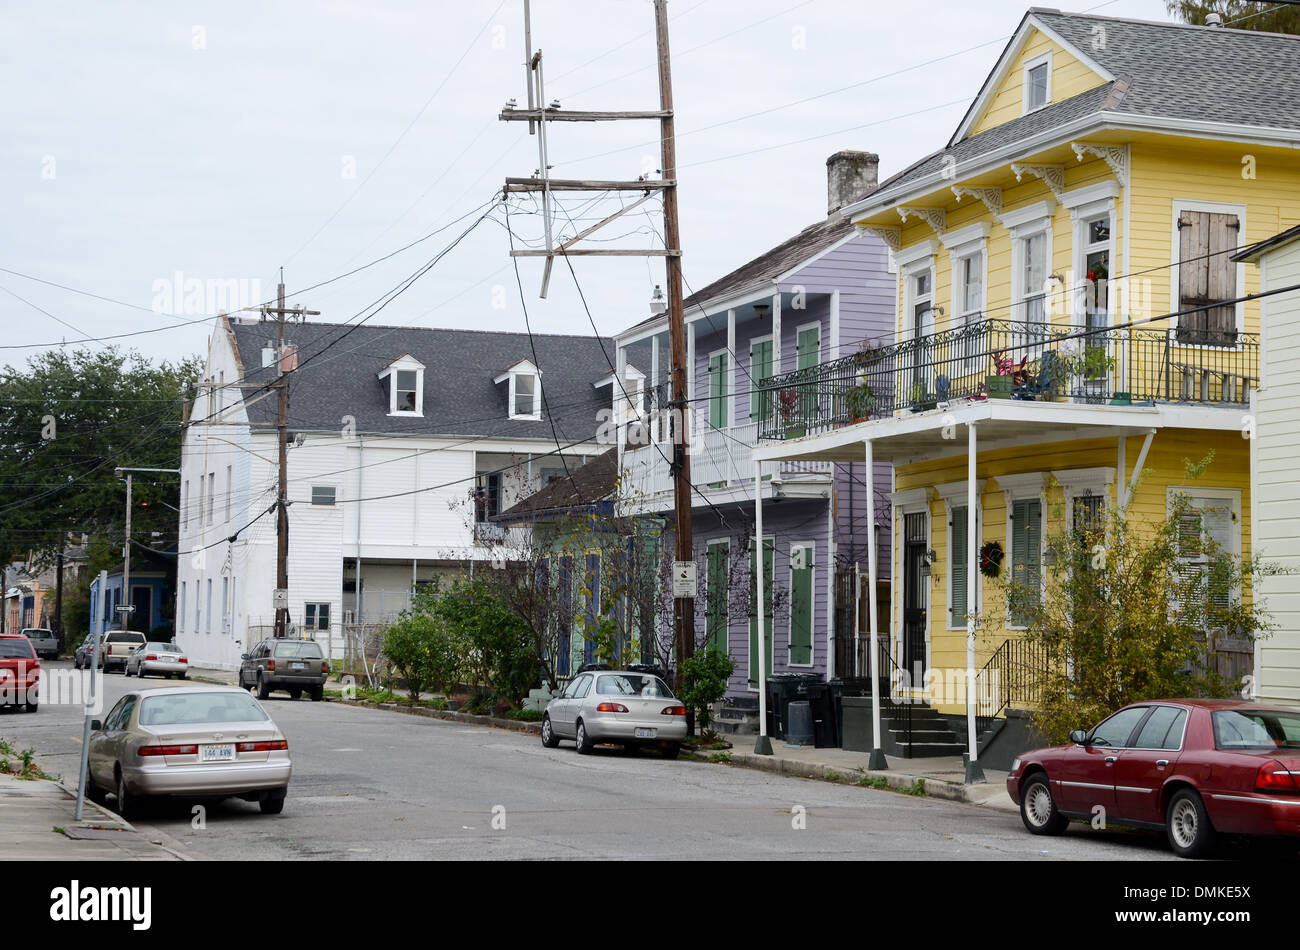 Treme, New Orleans, Nola, Louisiana, USA. Picturesque colorful traditional old wooden houses in Treme. Stock Photo